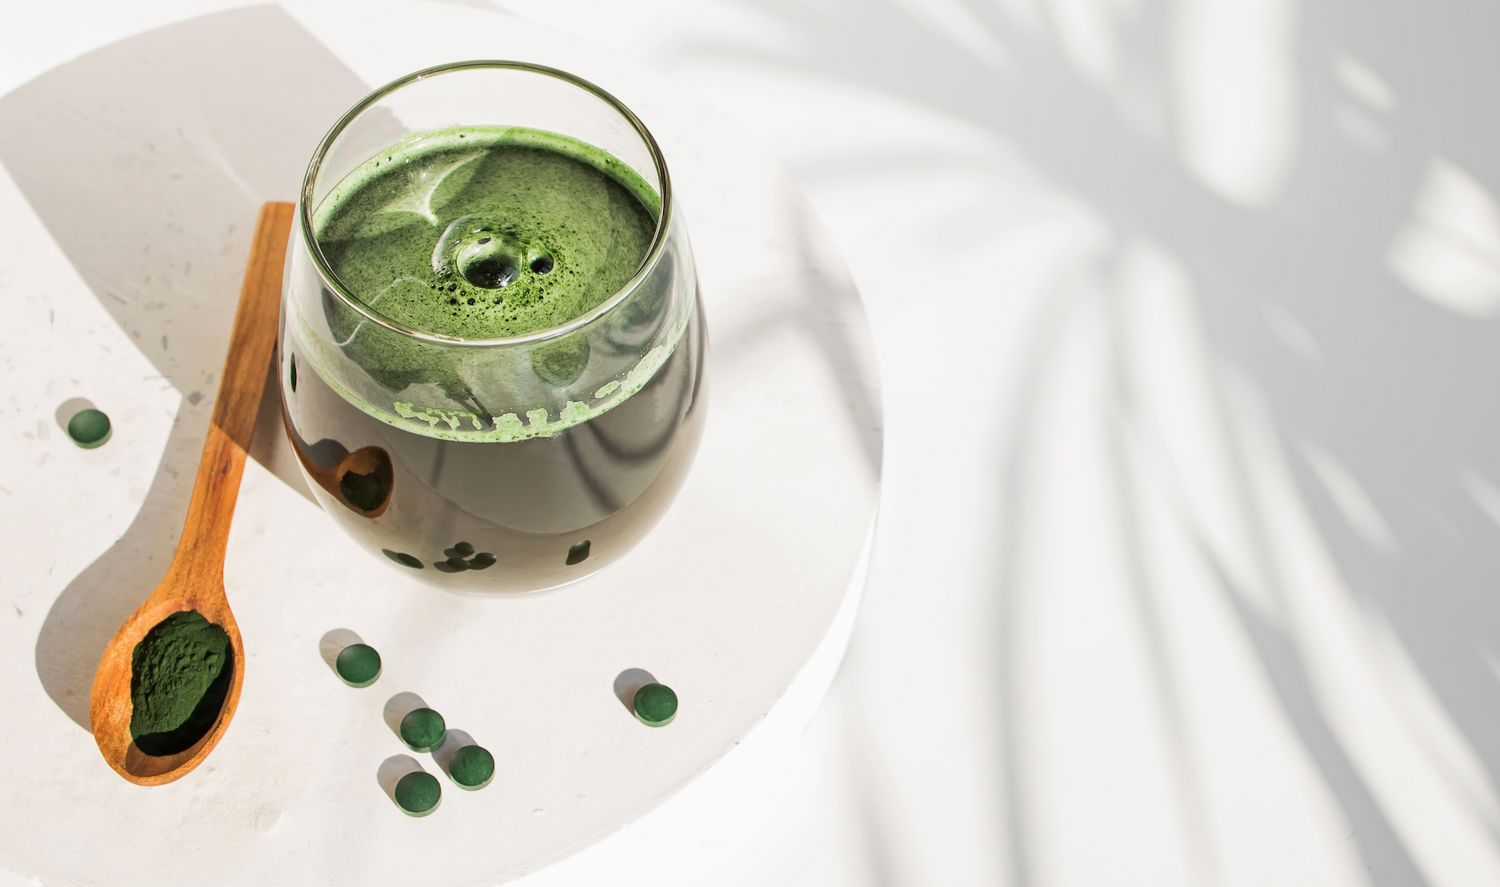 CHLORELLA ALGAE: THE REMARKABLE & WIDELY UNKNOWN SUPERFOOD